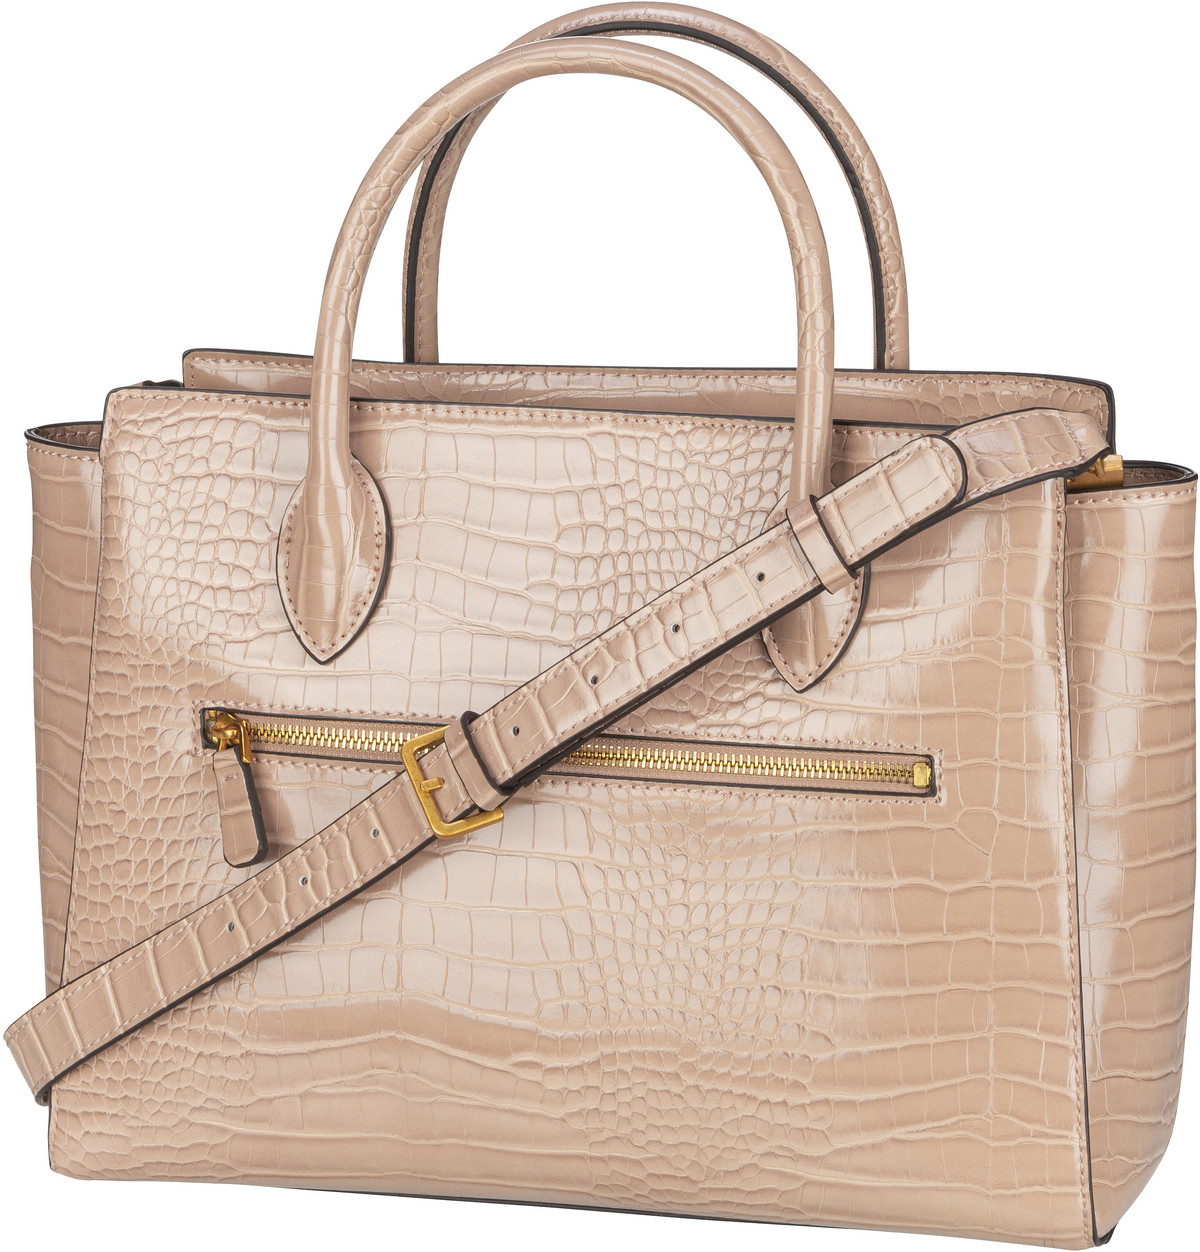 Guess Enisa High Society Satchel - Camel